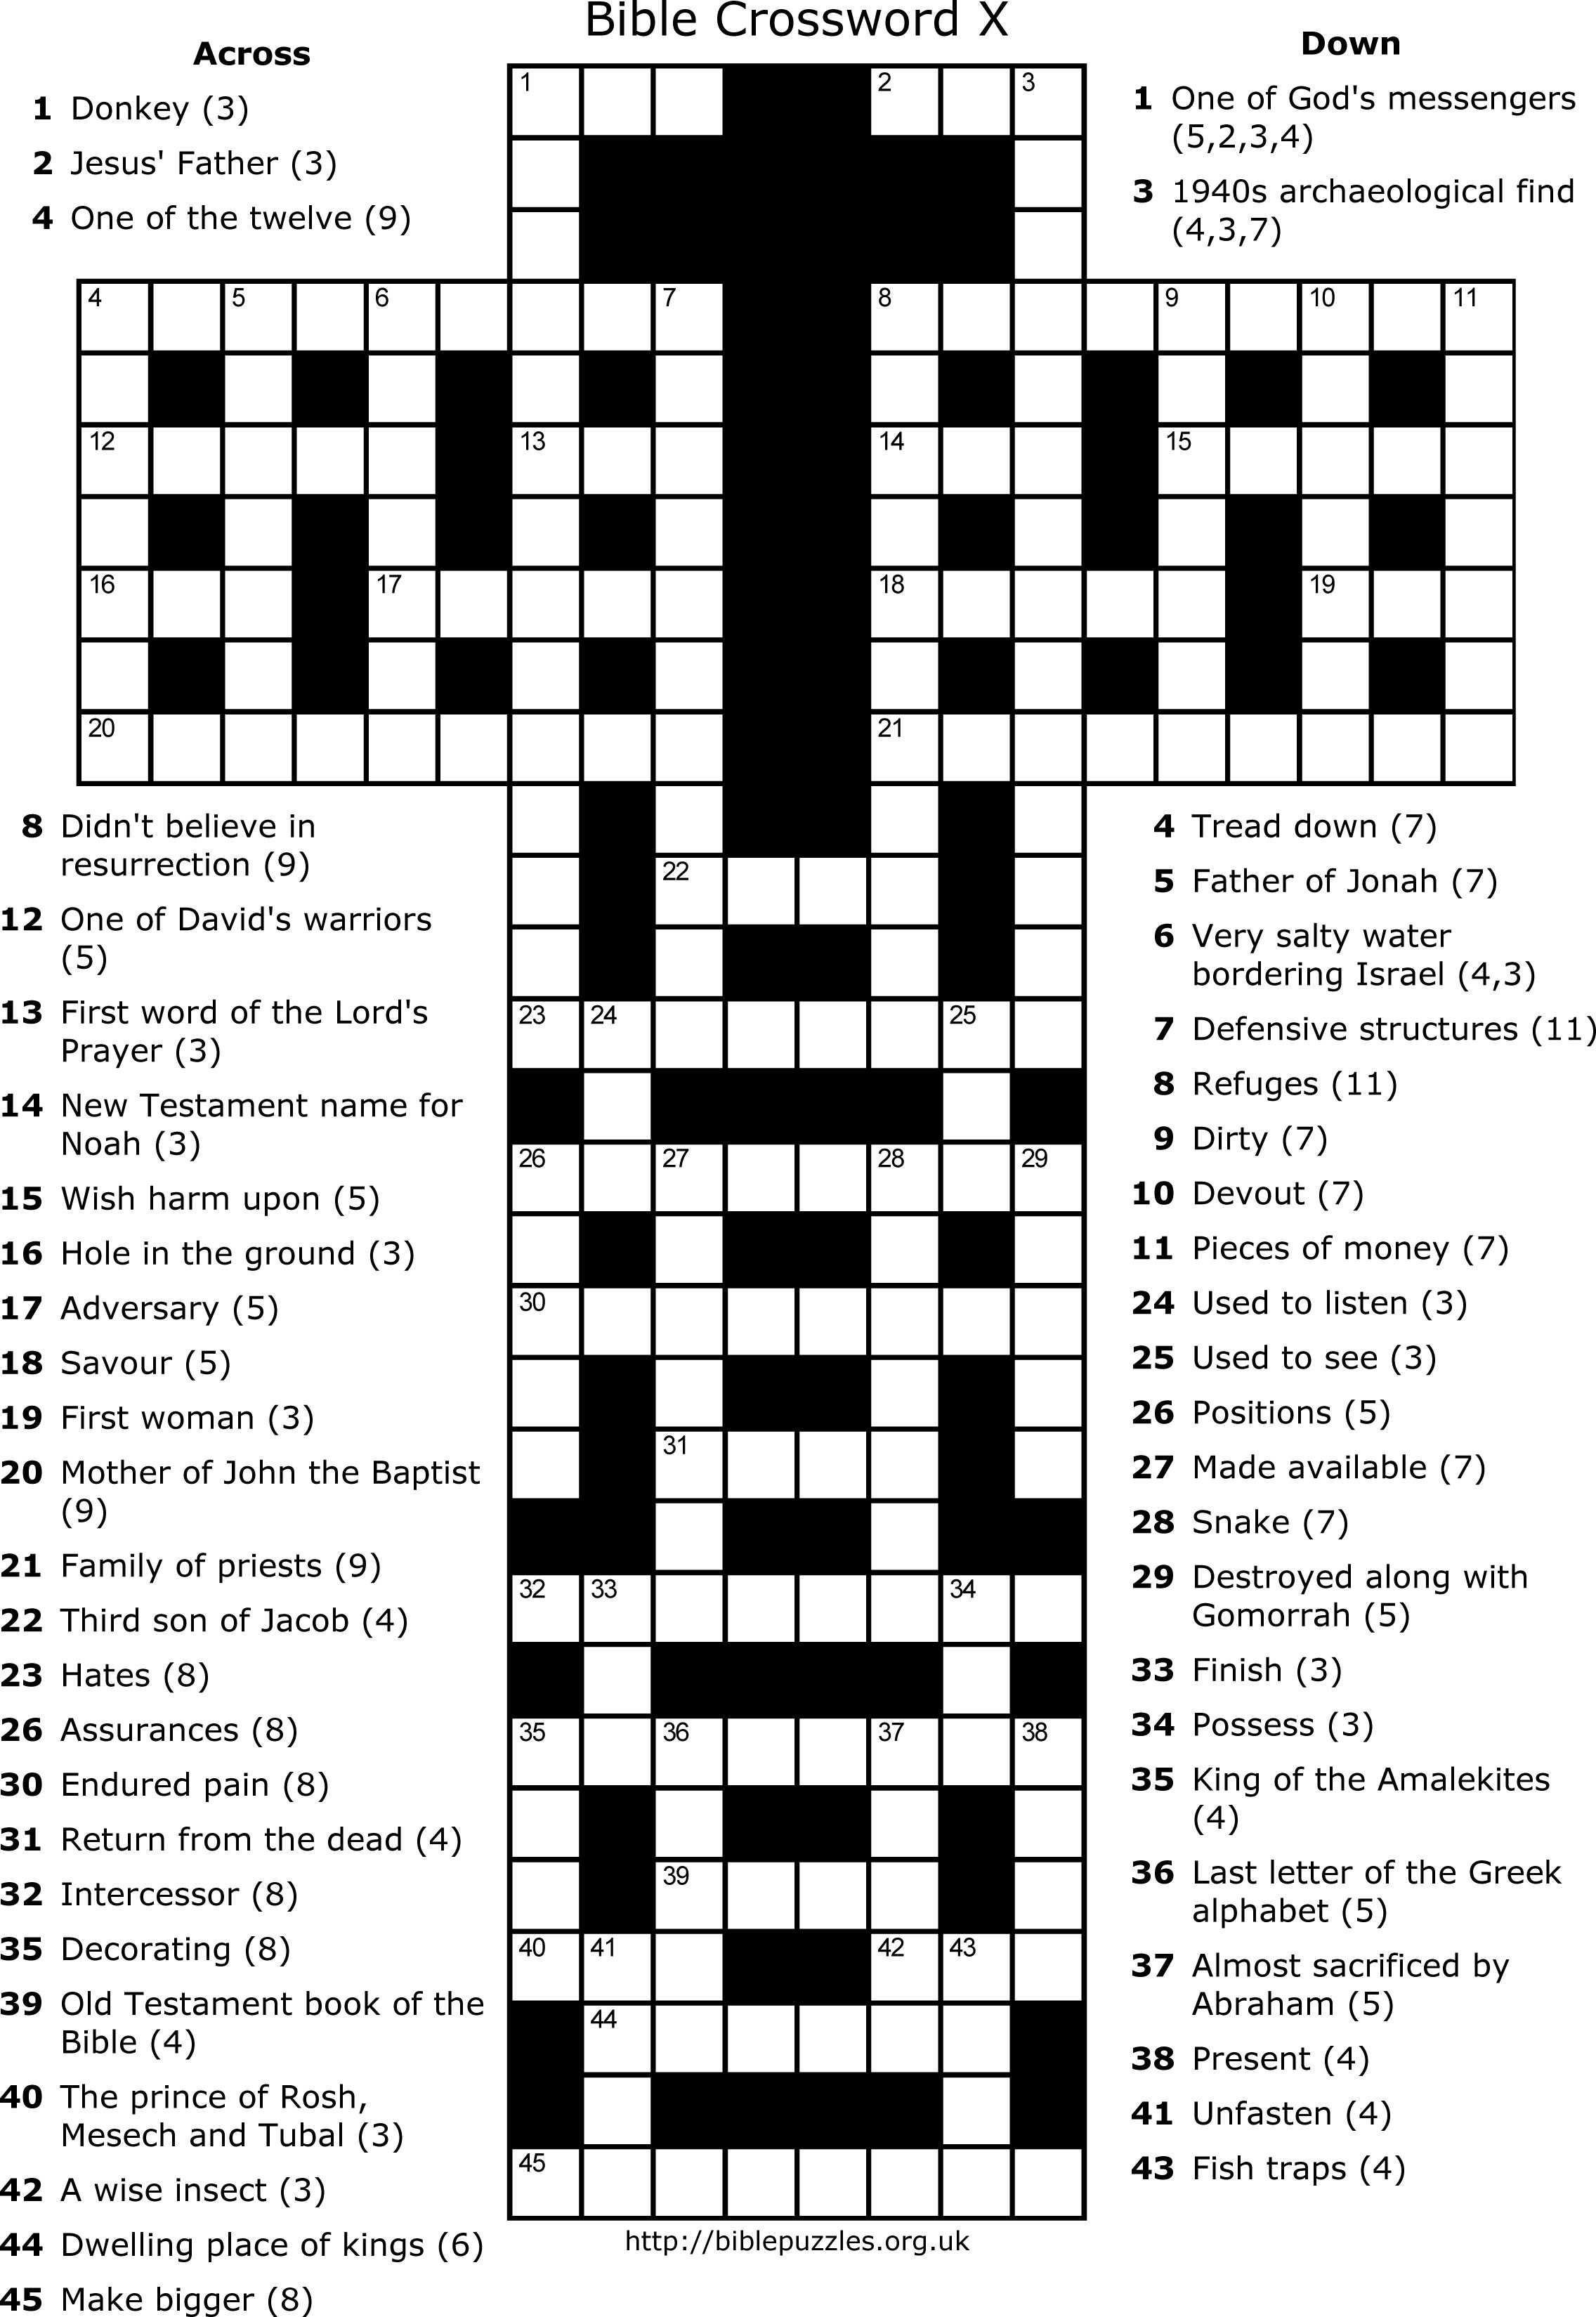 Bible Crossword Puzzles Printable With Answers Printable Crossword